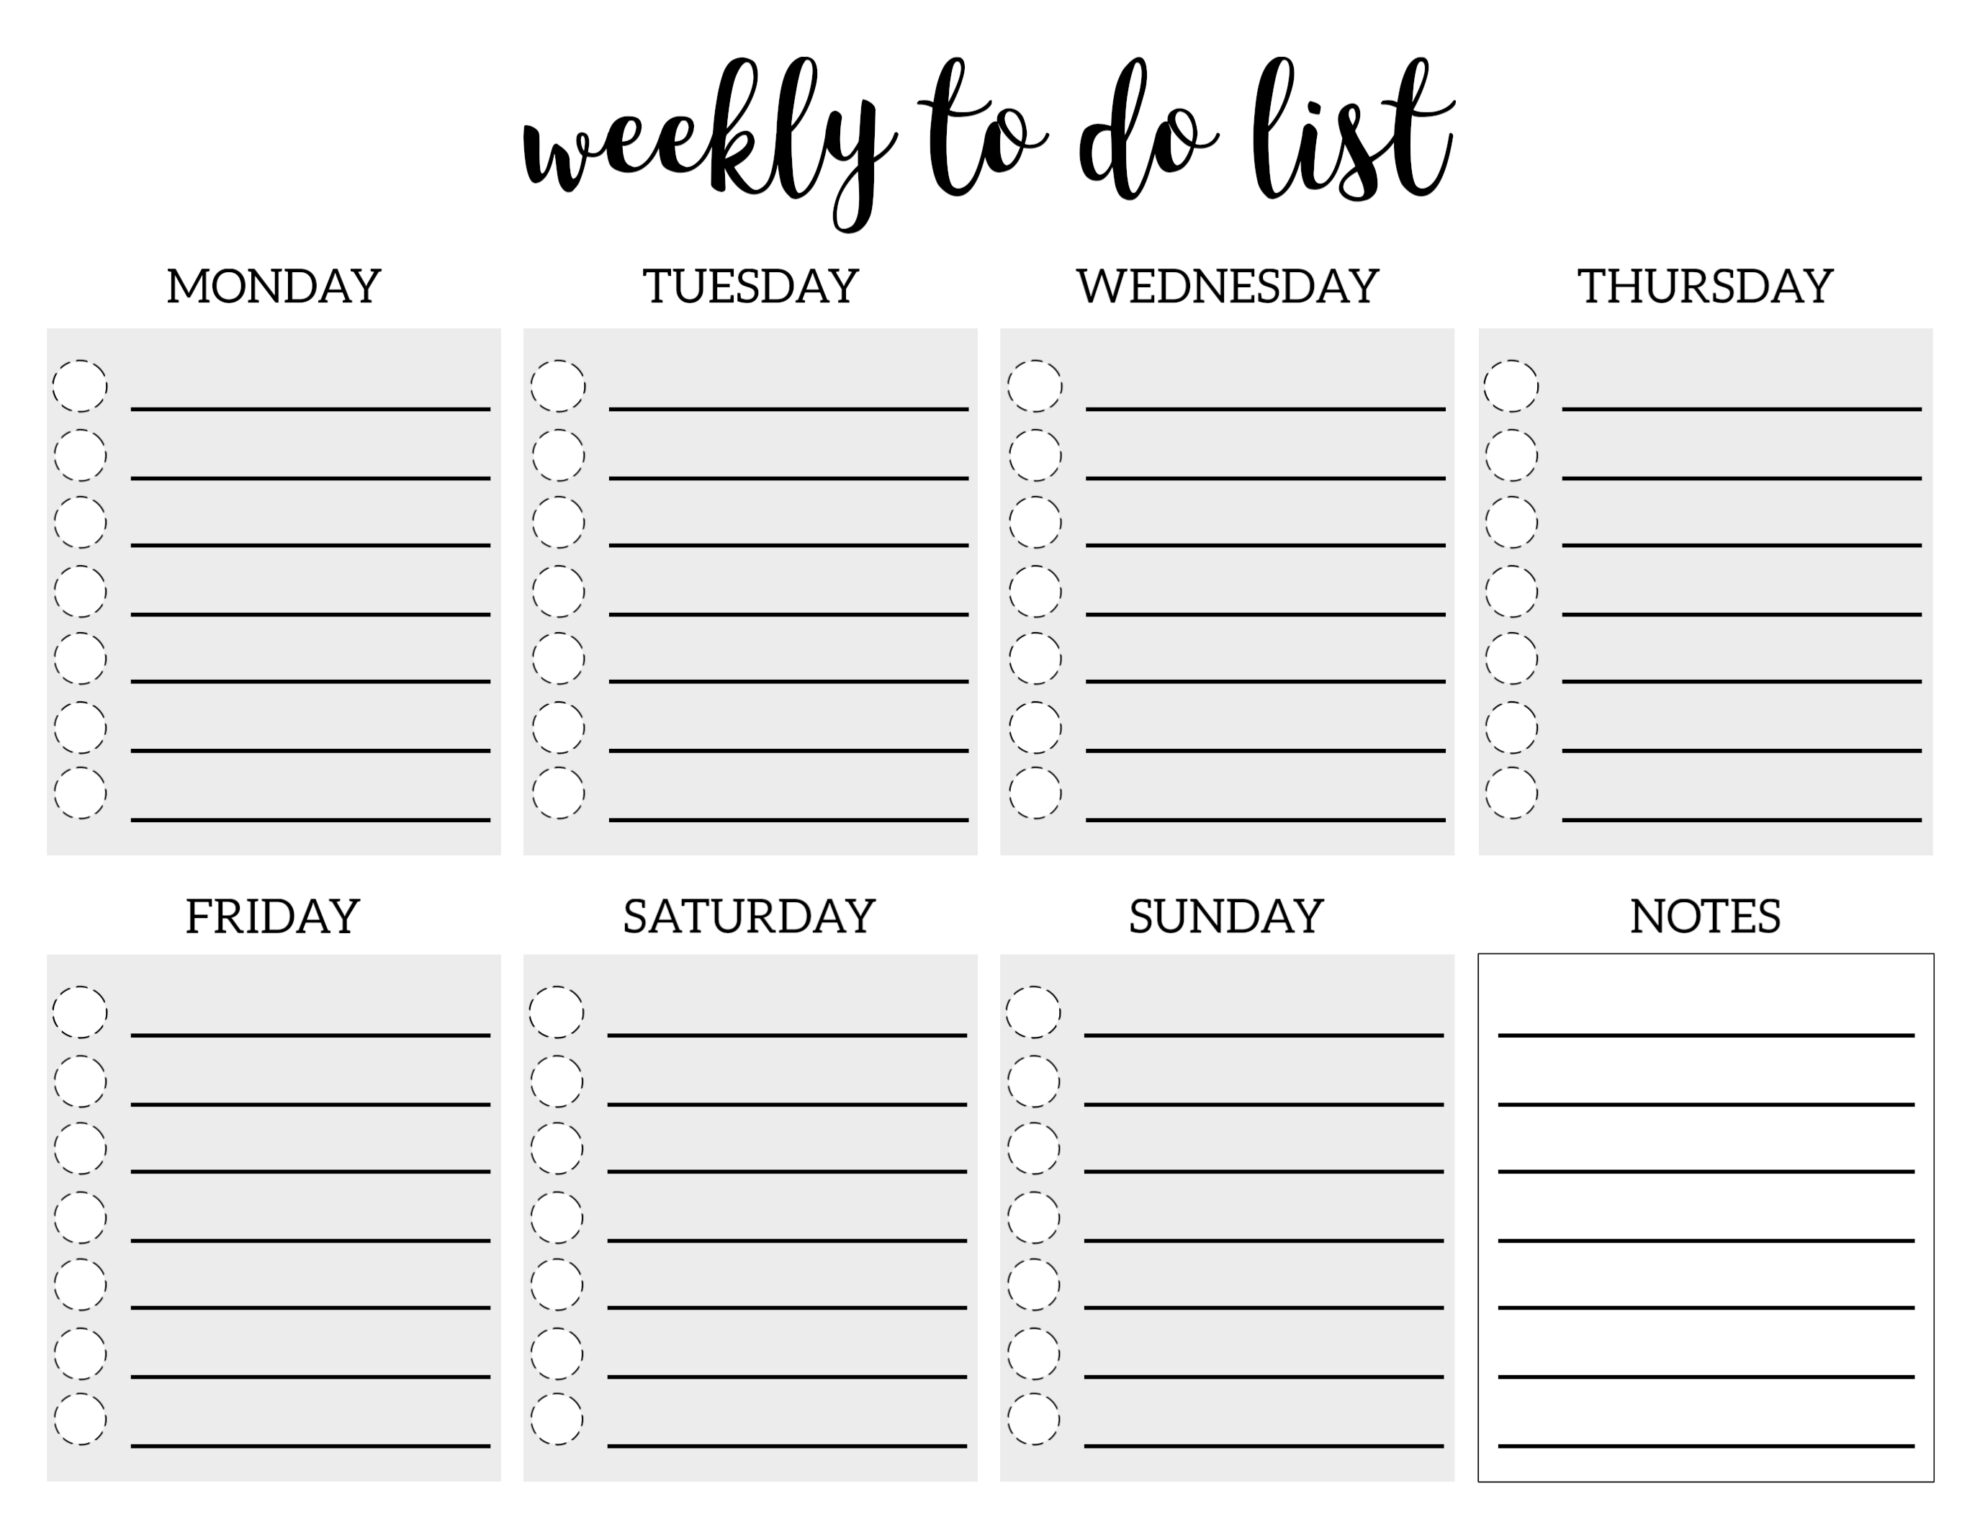 Weekly To Do List Printable Checklist Template - Paper Trail Design Within Blank To Do List Template